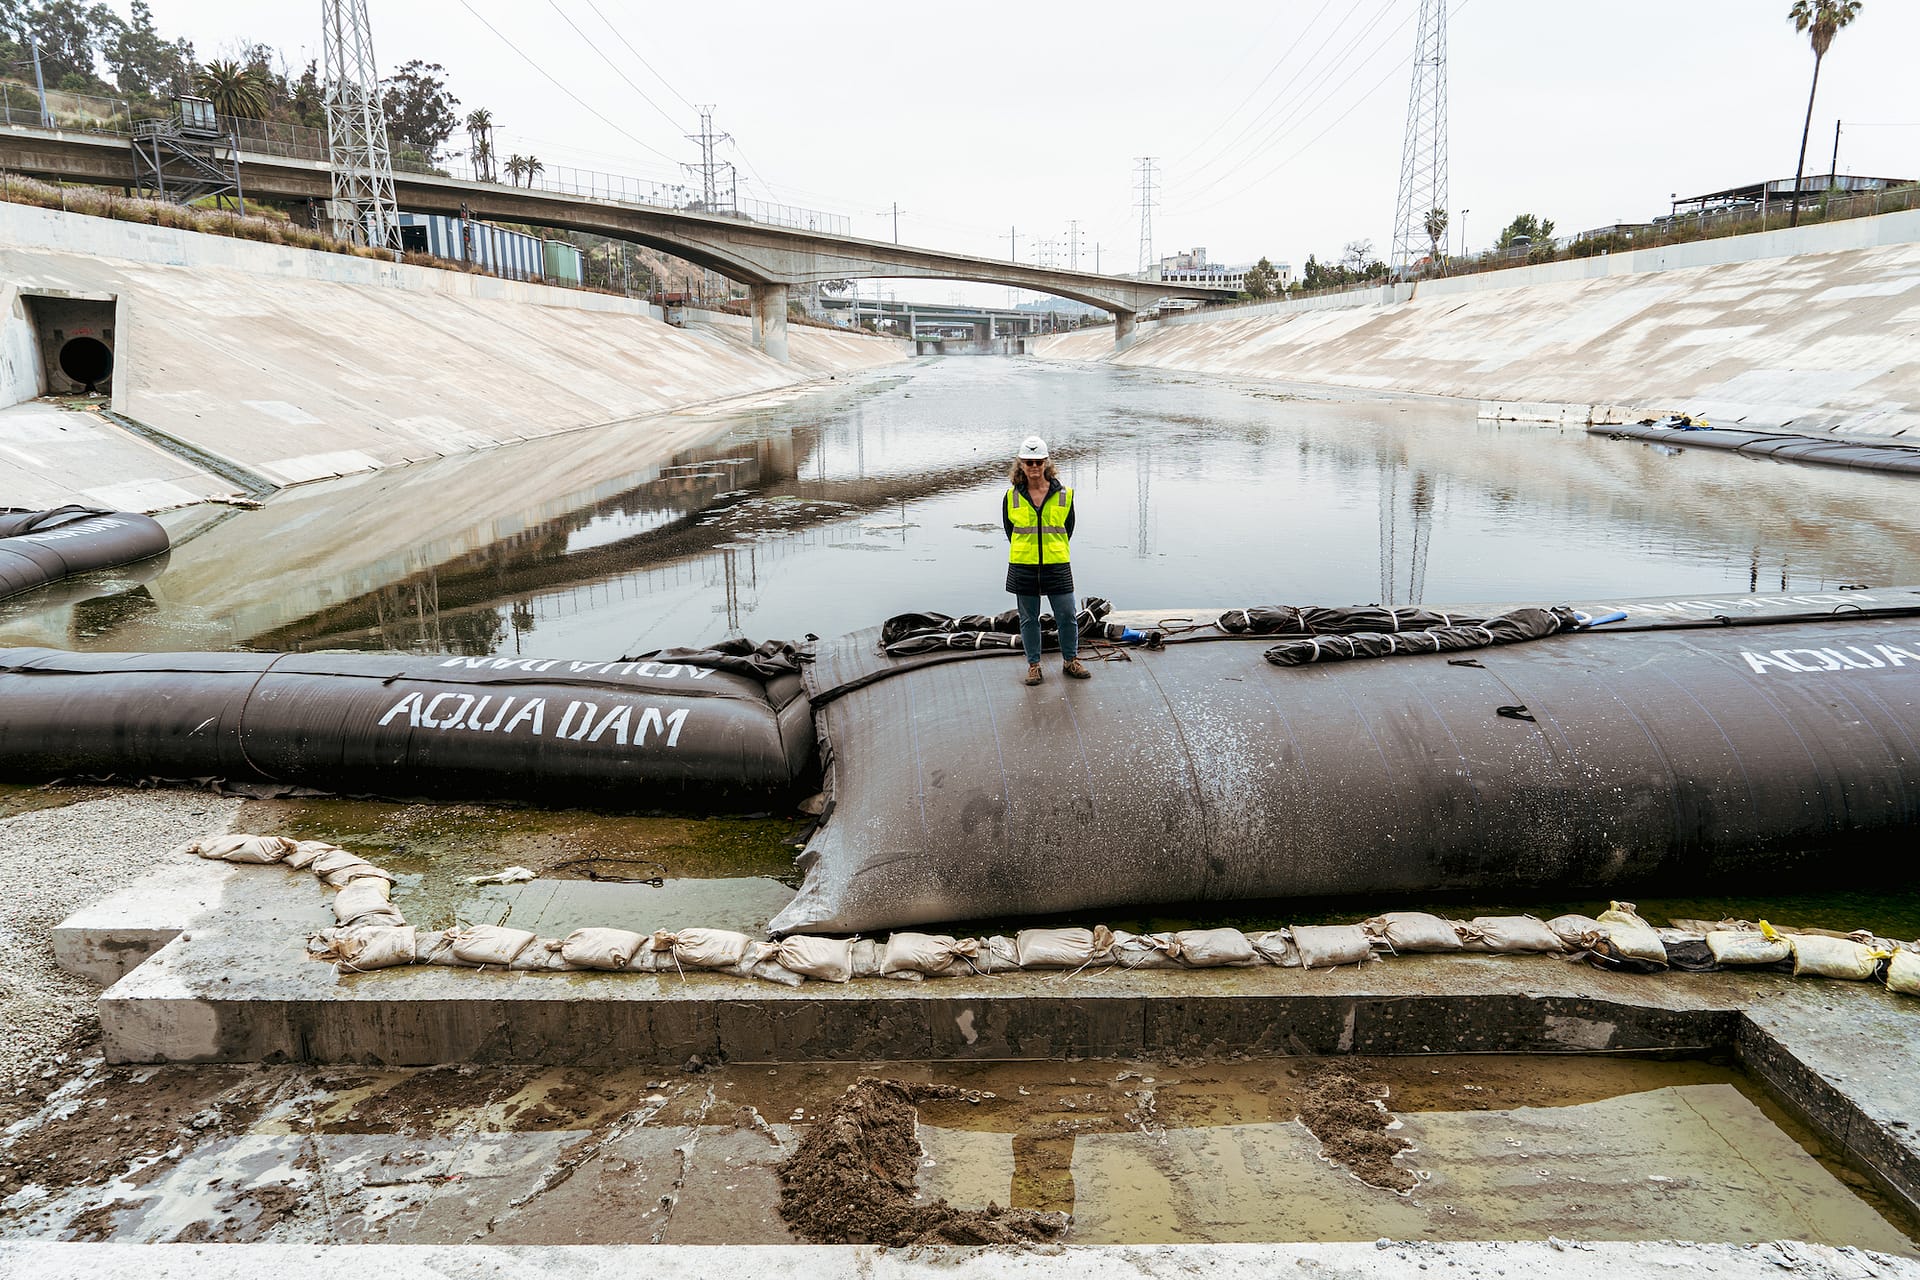 The Artist Working to Reclaim the LA River’s Water